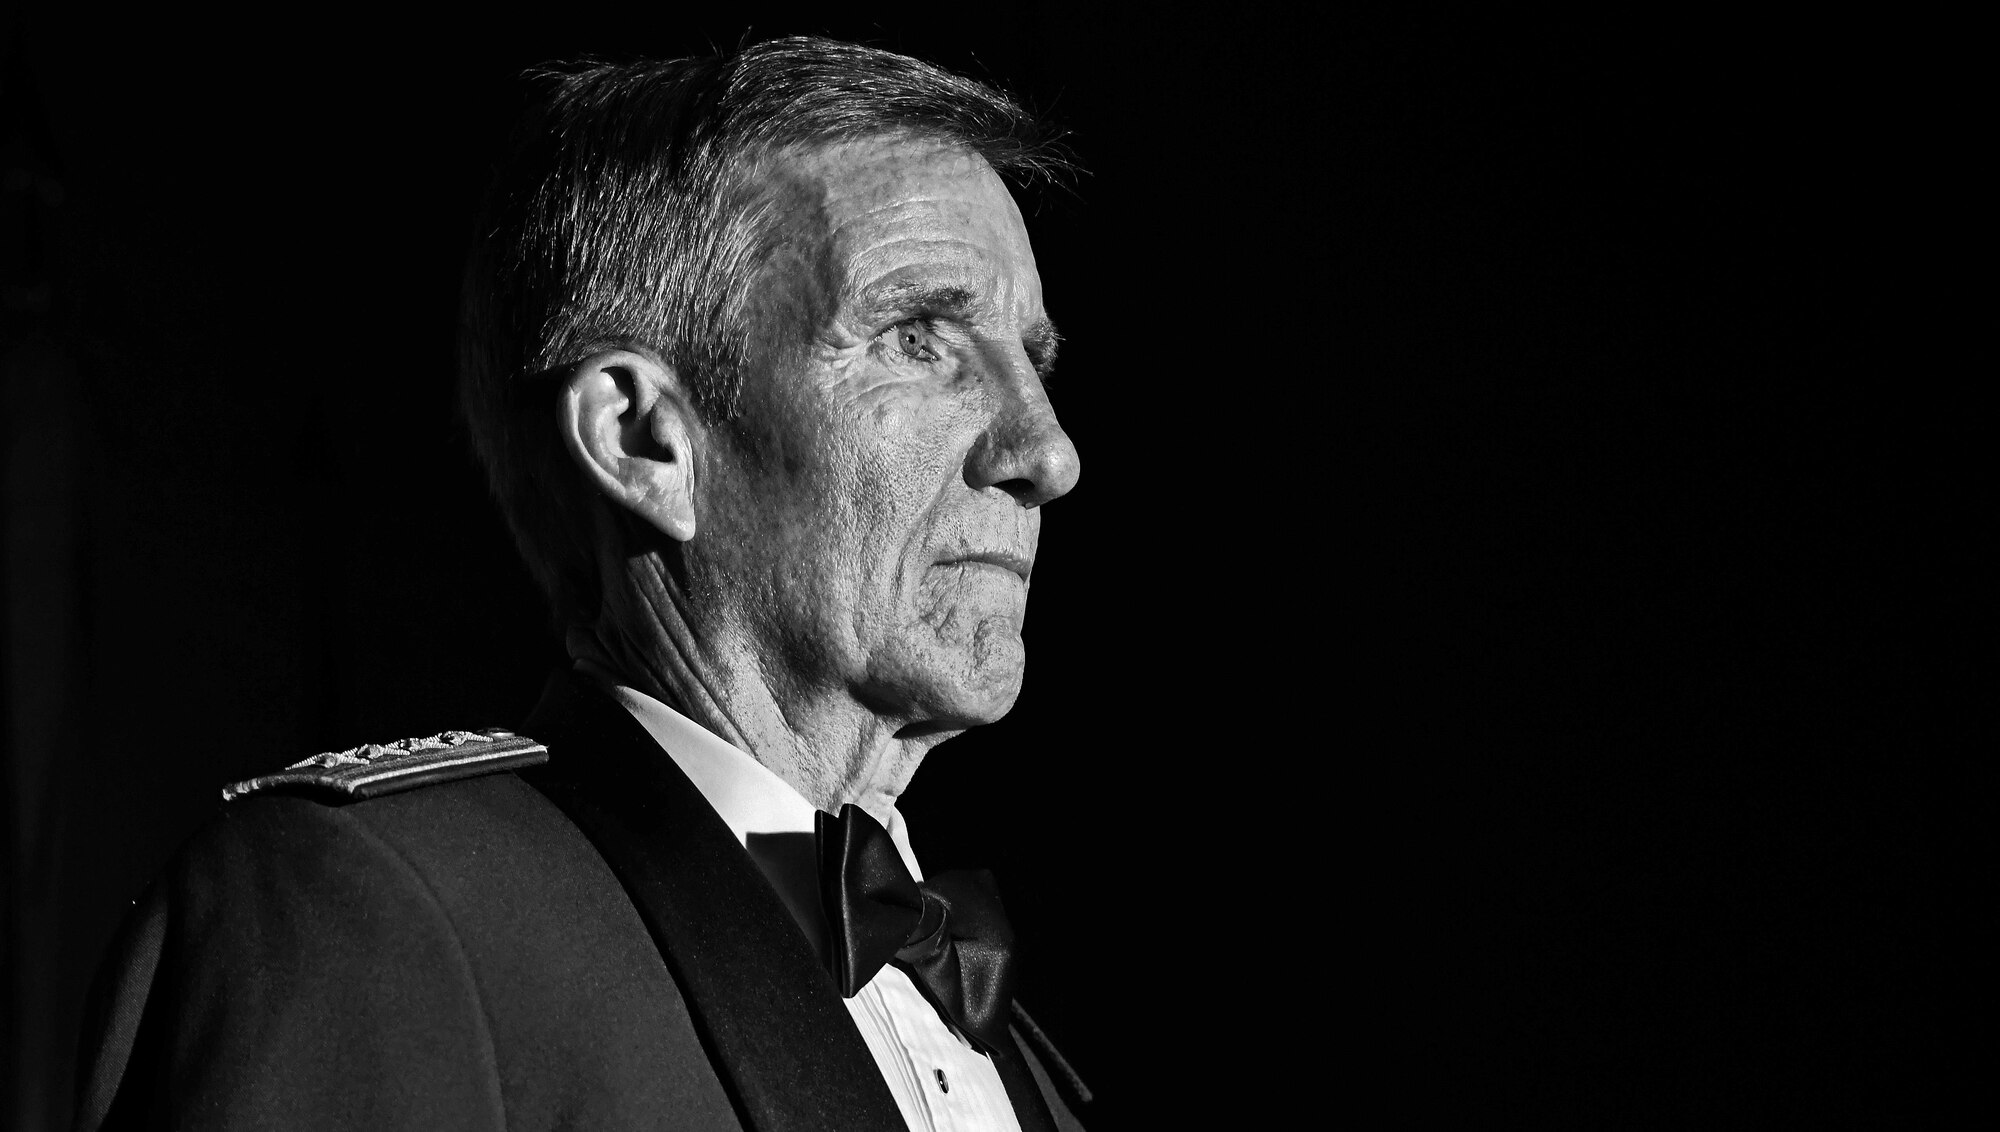 Gen. Hawk Carlisle, commander of Air Combat Command, stands at attention during the opening of his Order of the Sword presentation ceremony at the Hampton Roads Convention Center in Hampton, Va., Oct. 27, 2016. Military branches around the world present prestigious swords of honor to recognize the accomplishments and service to their country and fellow man. In the Air Force, the Order of the Sword remains the highest and only honor presented by the noncommissioned officer corps to a senior ranking officer and is maintained by the command chief master sergeant of the designated command. (U.S. Air Force photo by Staff Sgt. Nick Wilson)